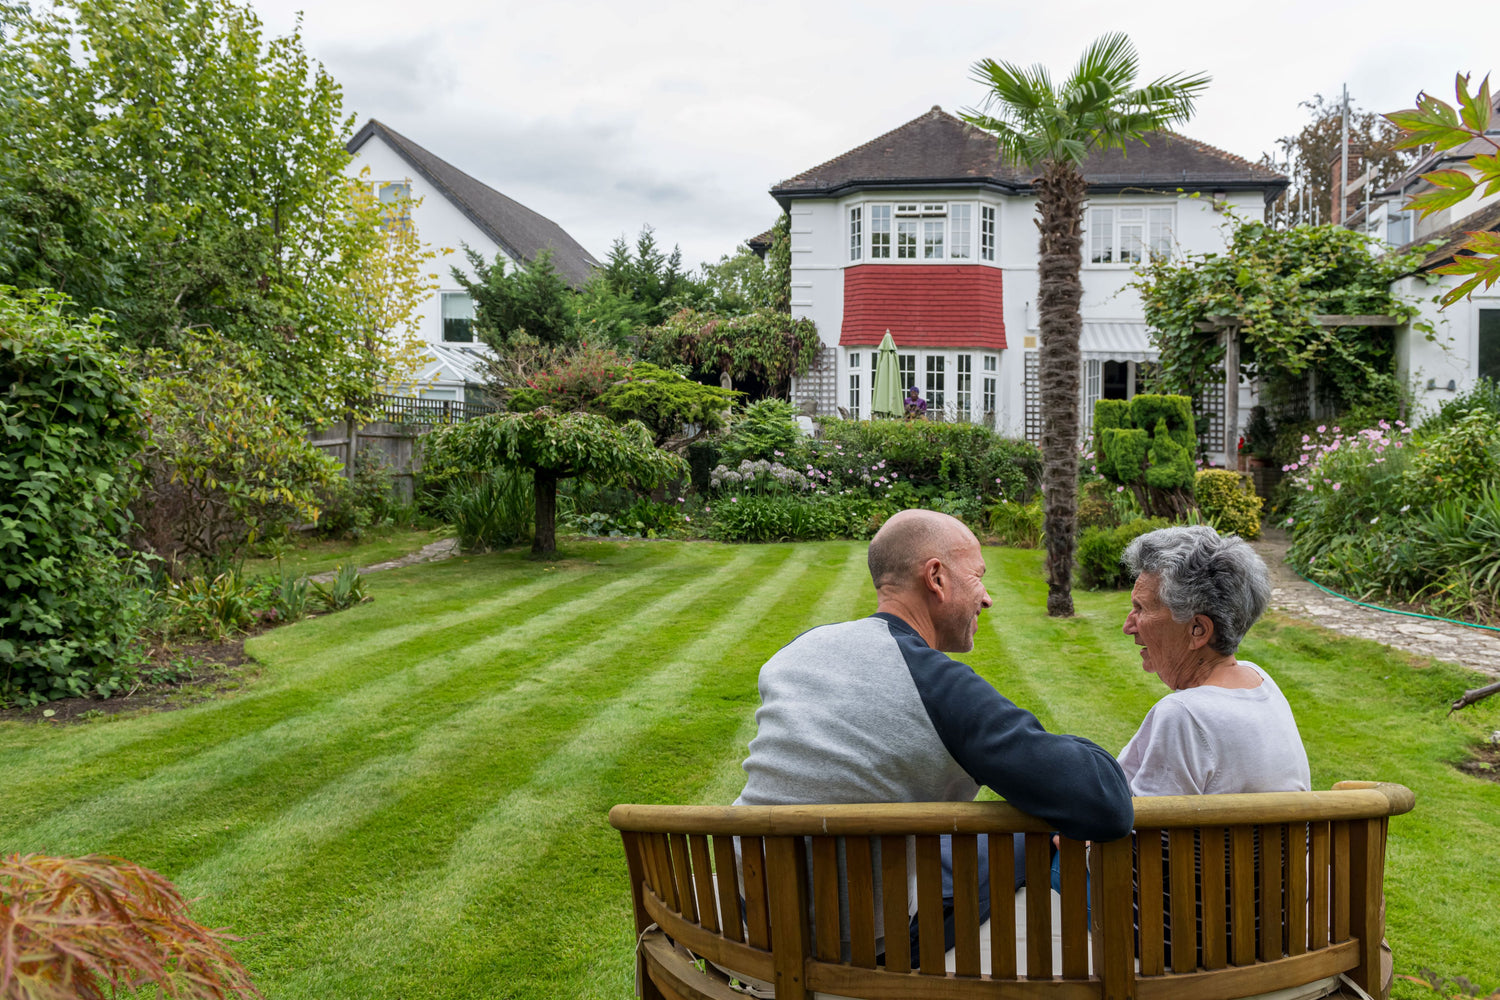 Son and Mother sat enjoying their vibrant, green healthy GreenThumb Lawn